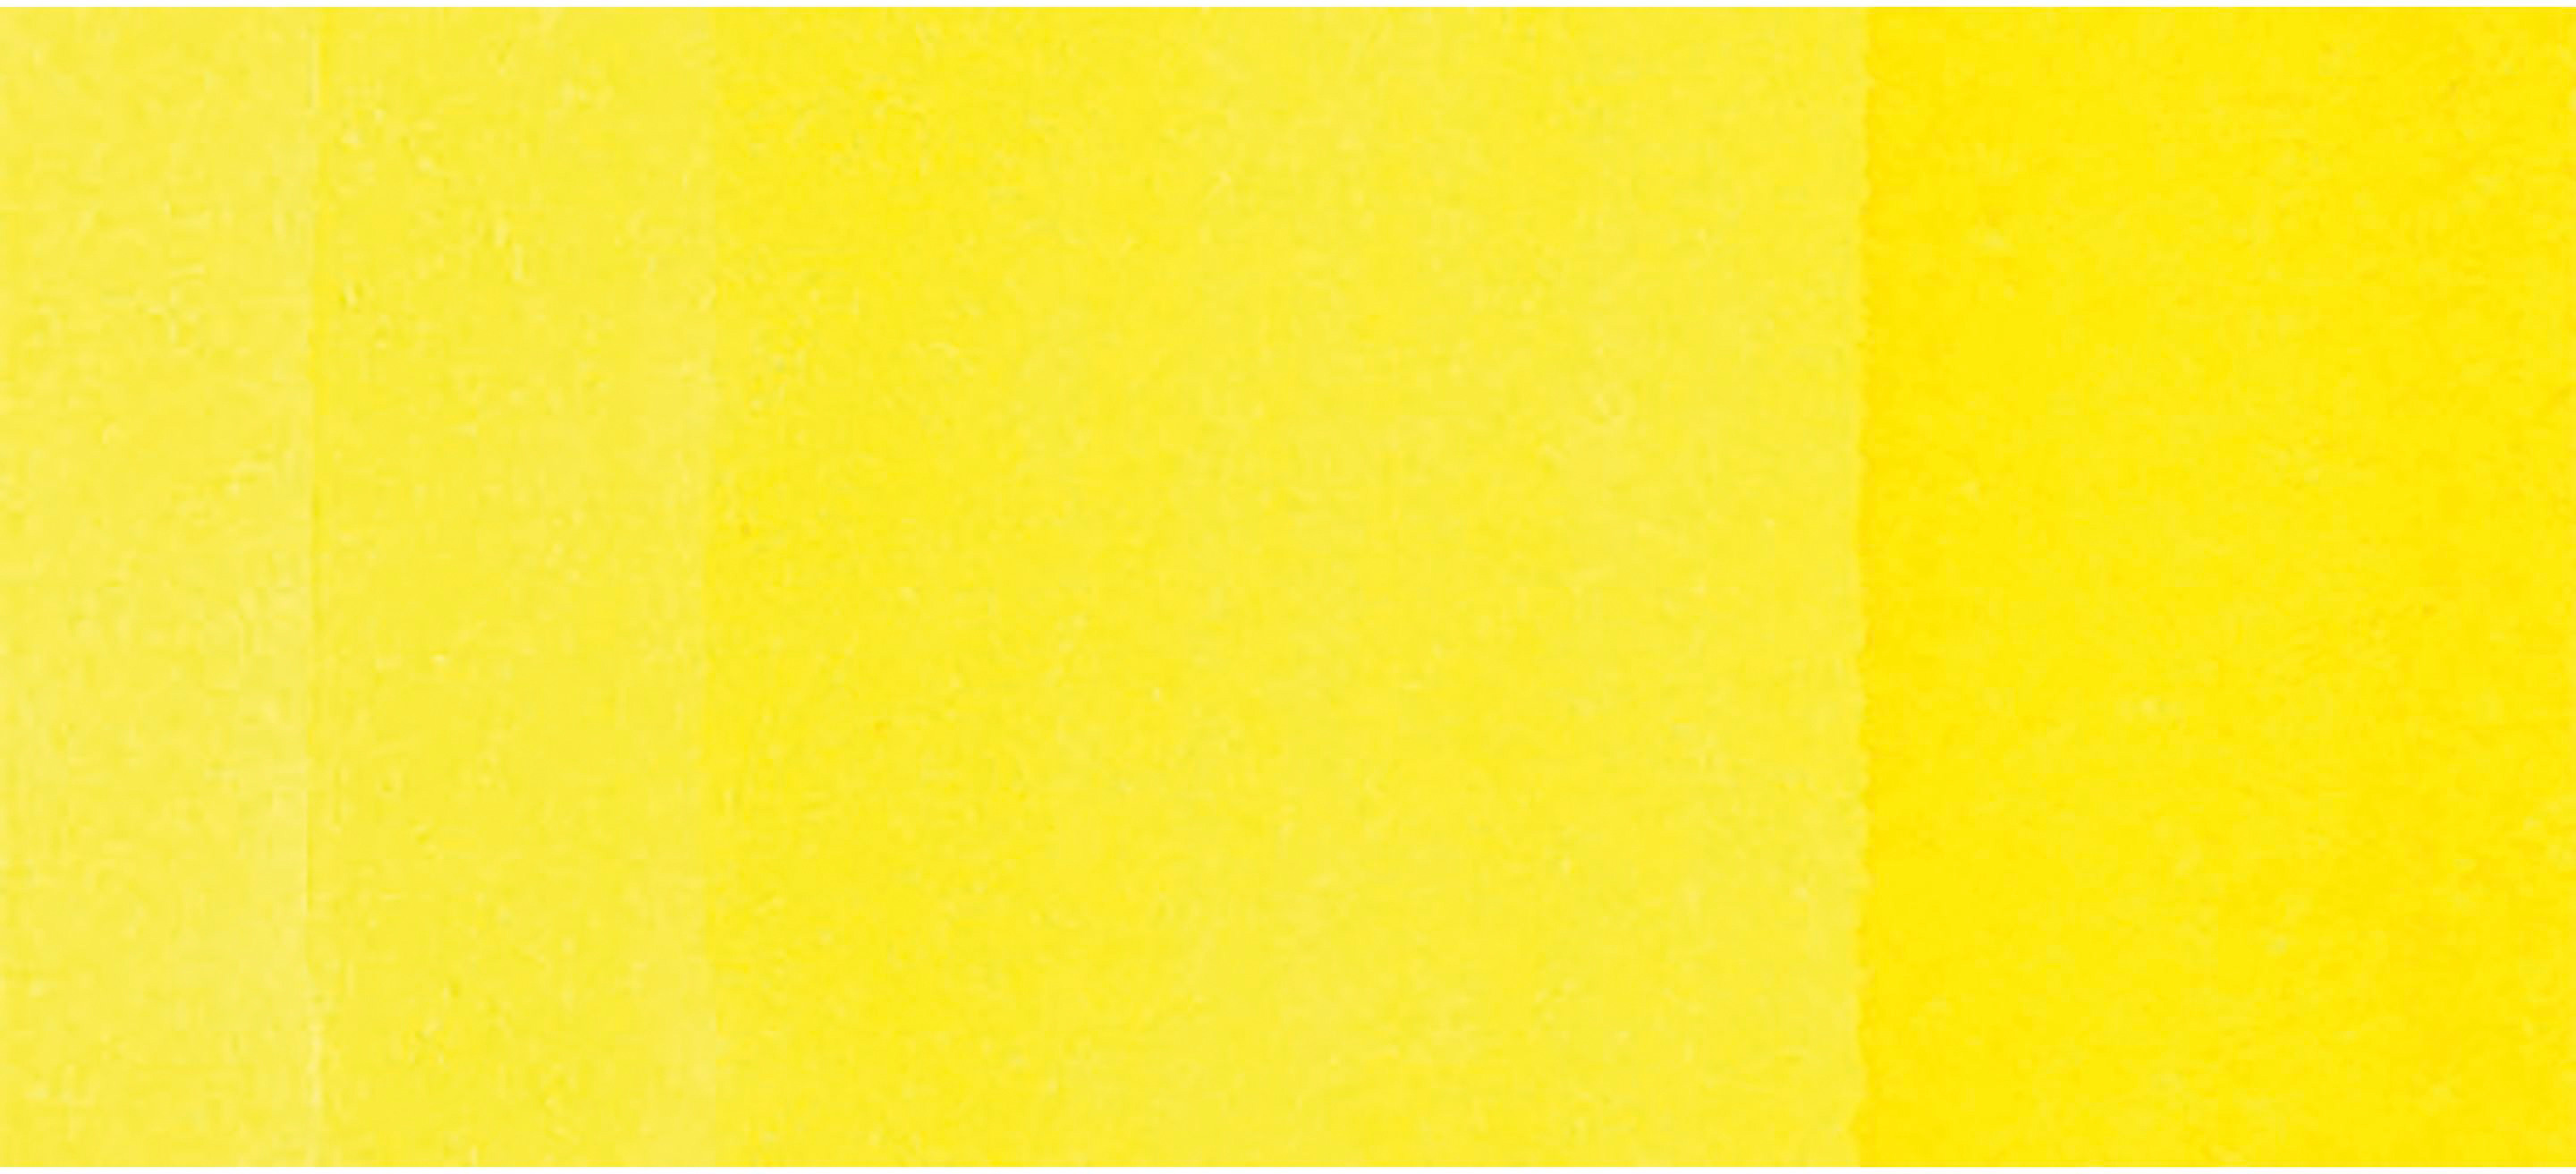 COPIC Marker Ciao 2207571 Y06 - Yellow